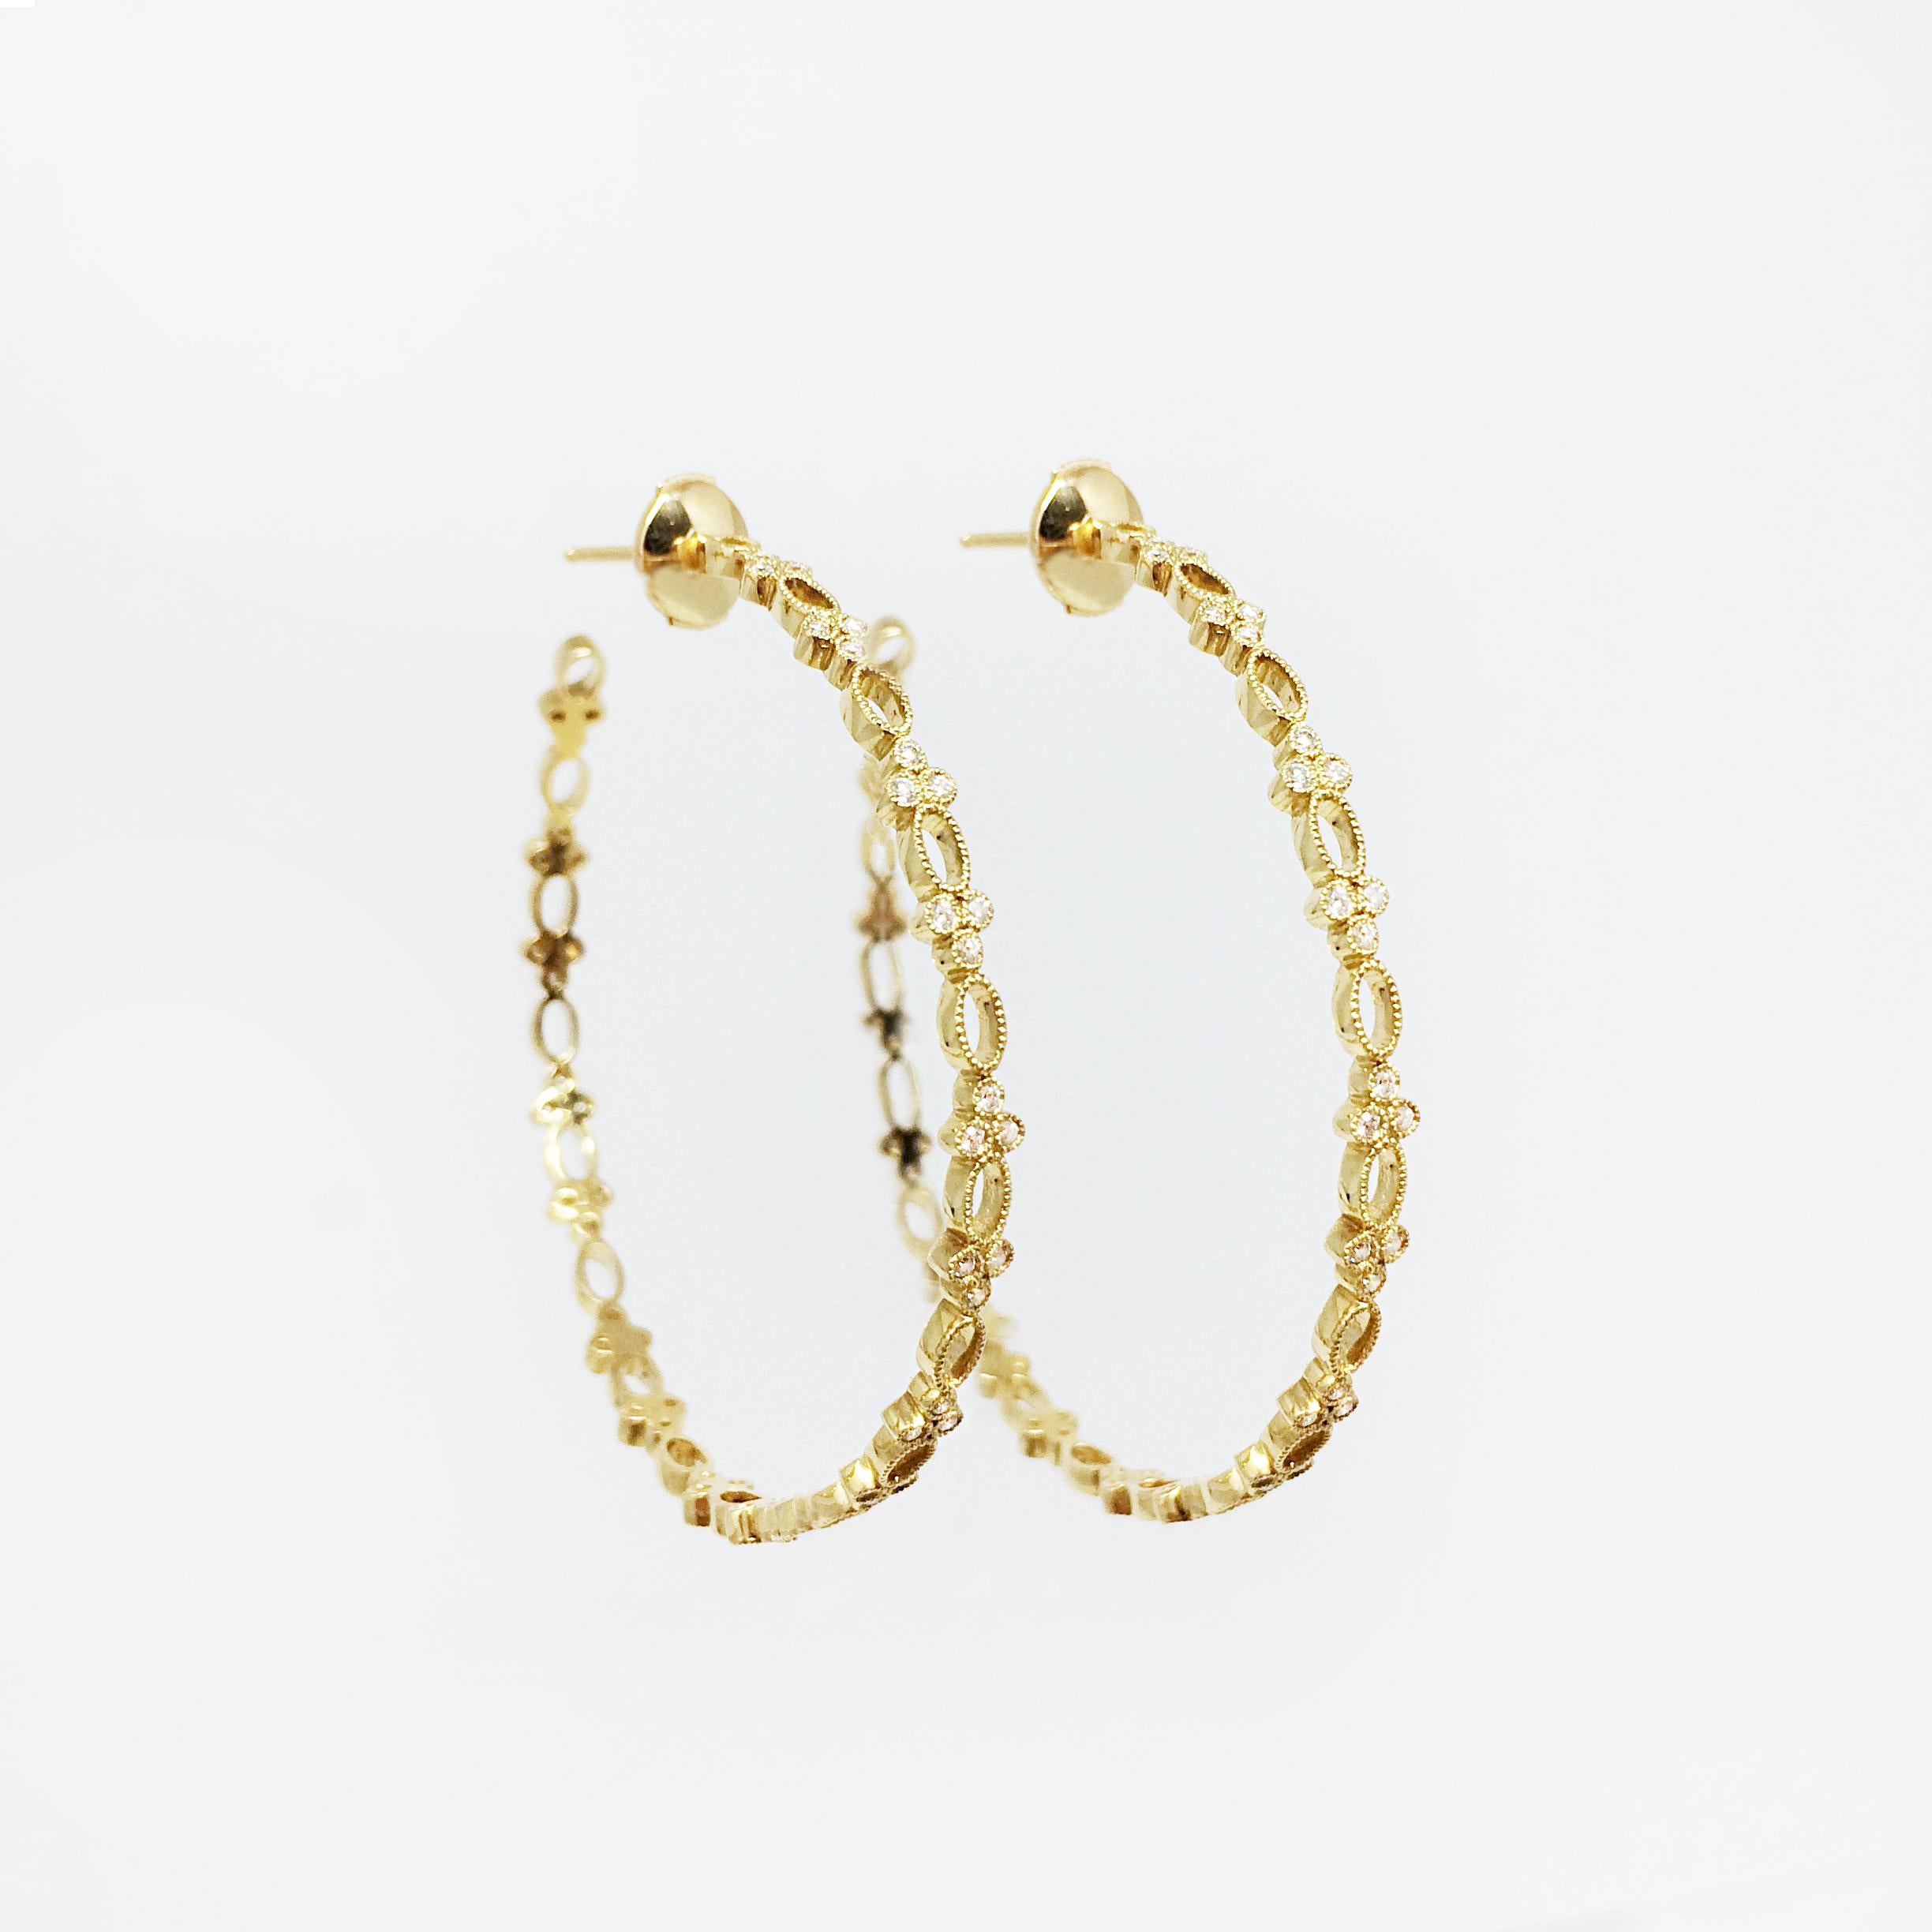 By Stone Paris

Large hoops earrings
18-kt yellow gold 7.70 g
102 GVS white diamonds 0.51 ct
Alpa system - Inner diameter 4.5 cm

This jewel is also available in white gold, pink gold, and black gold.
For more information please contact us.